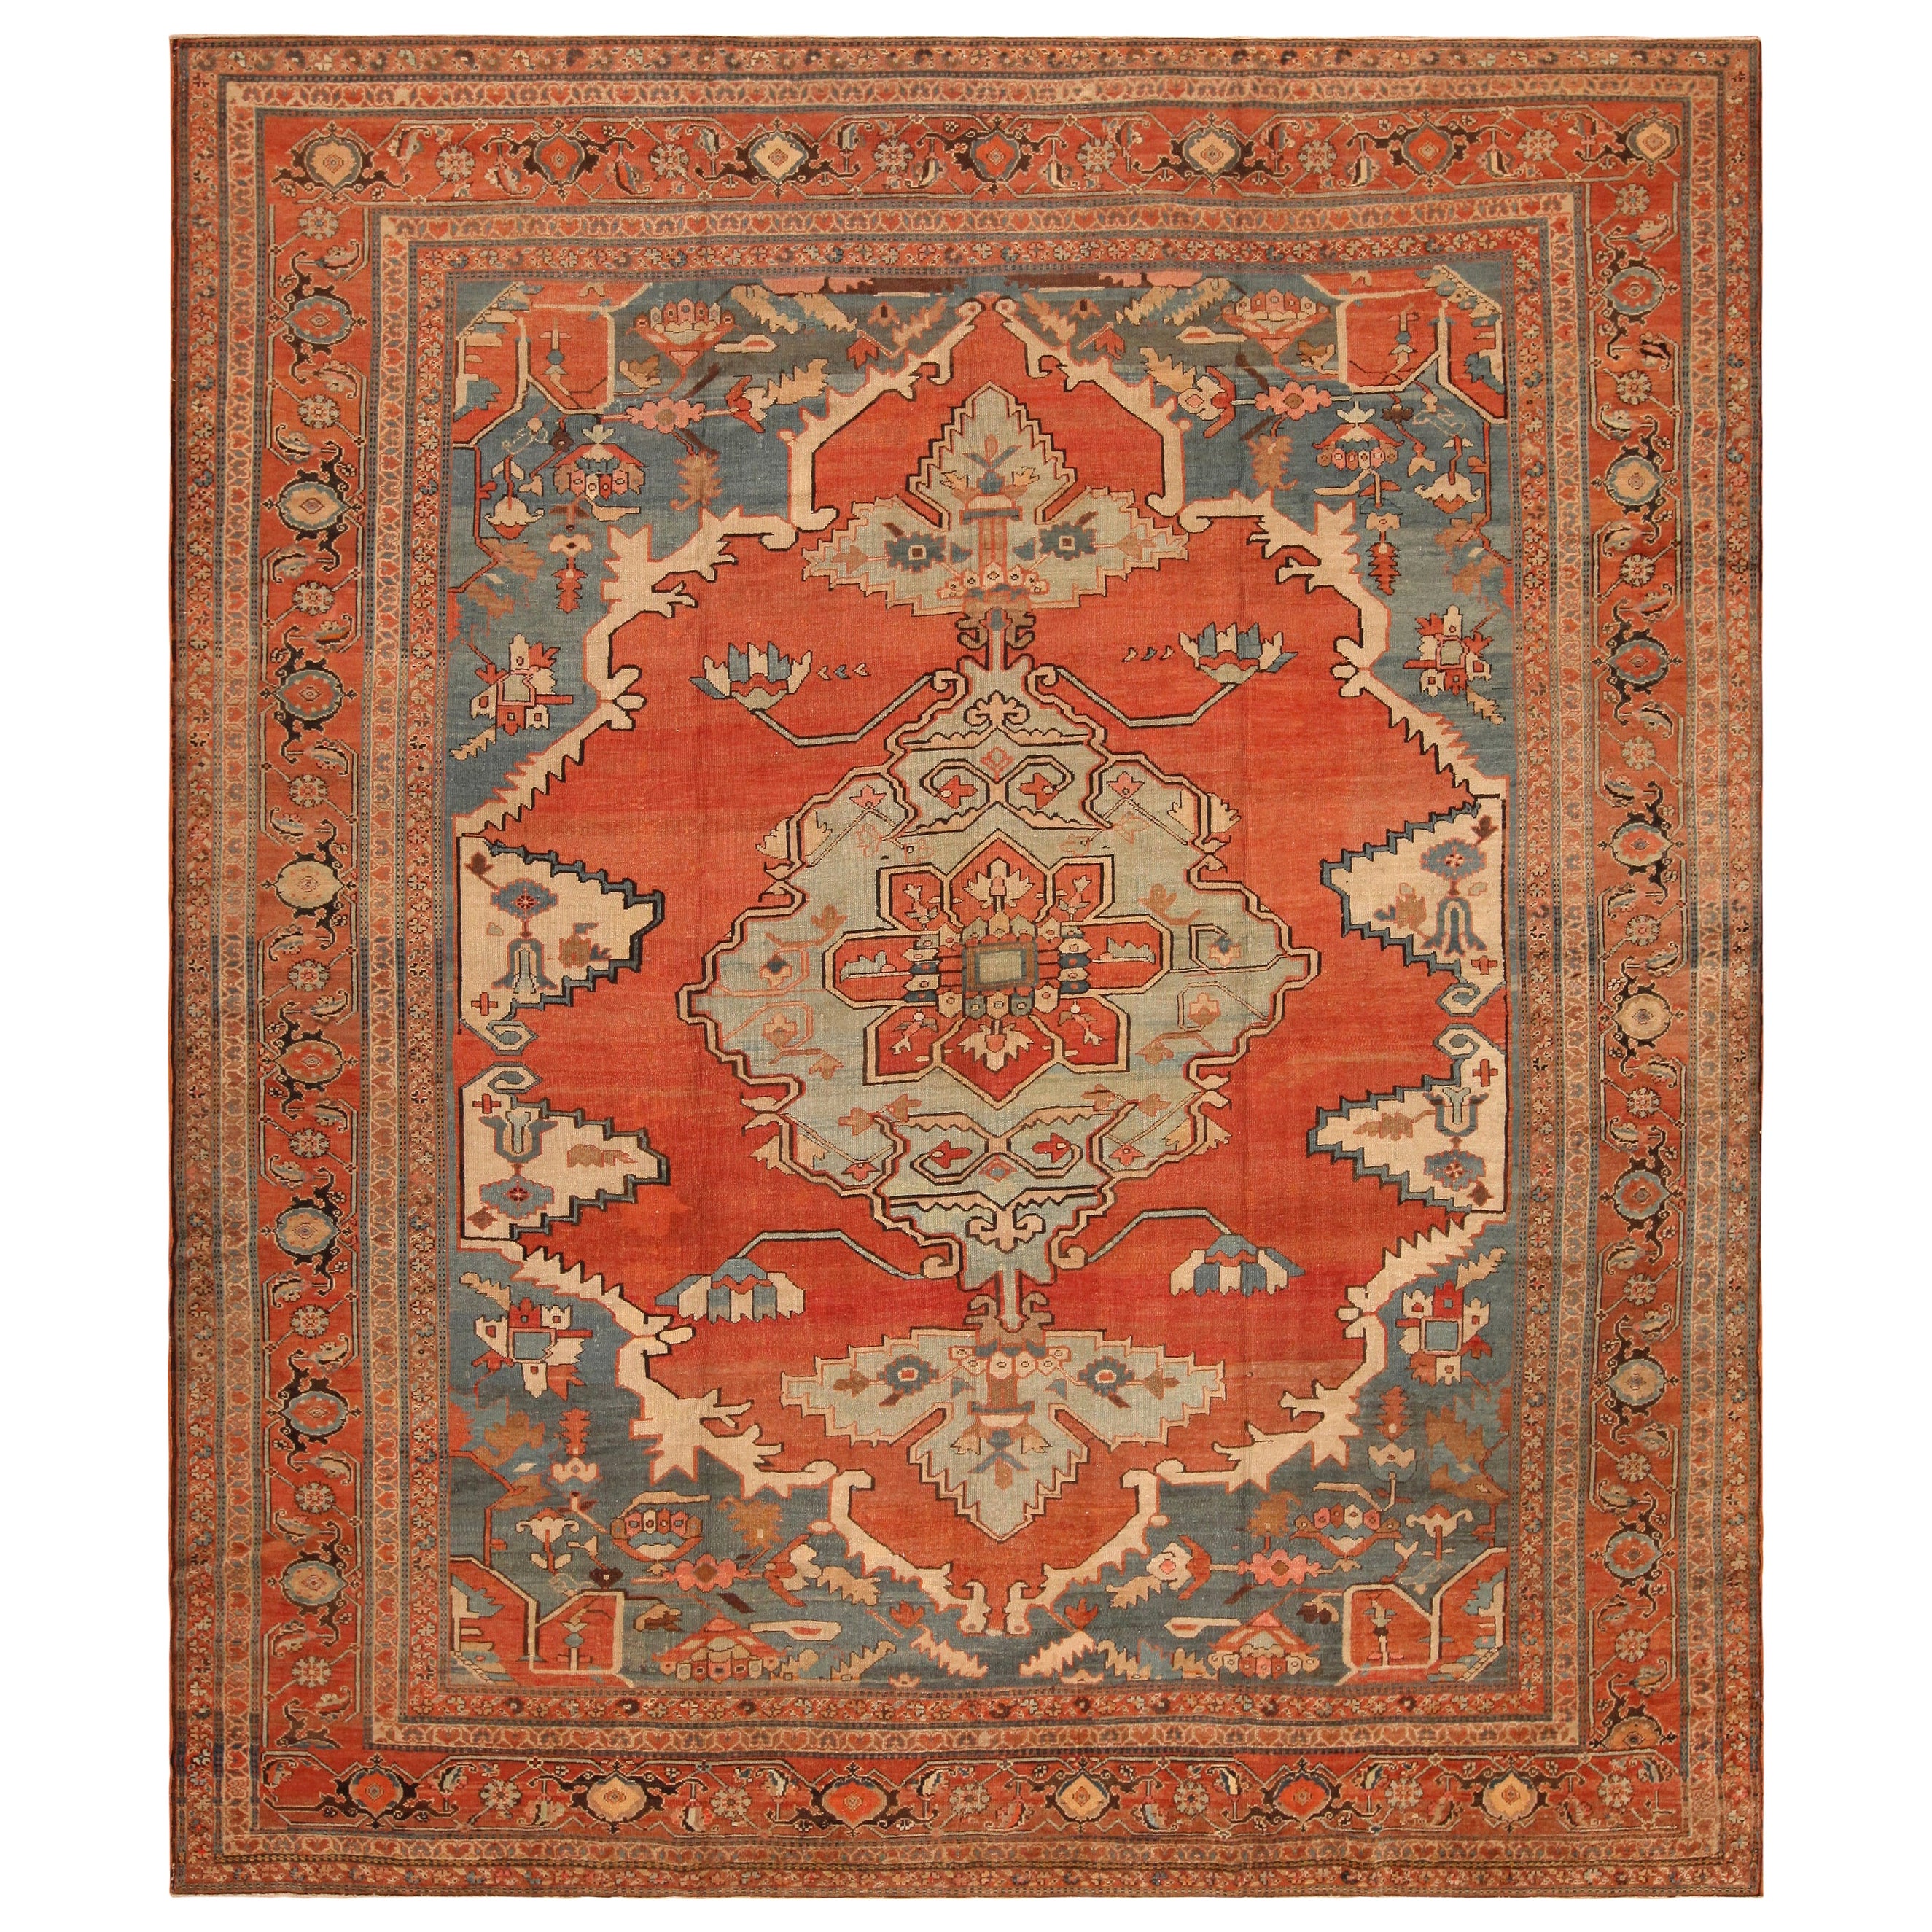 Tapis persan antique Serapi. Taille : 10 ft 7 in x 12 ft 2 in